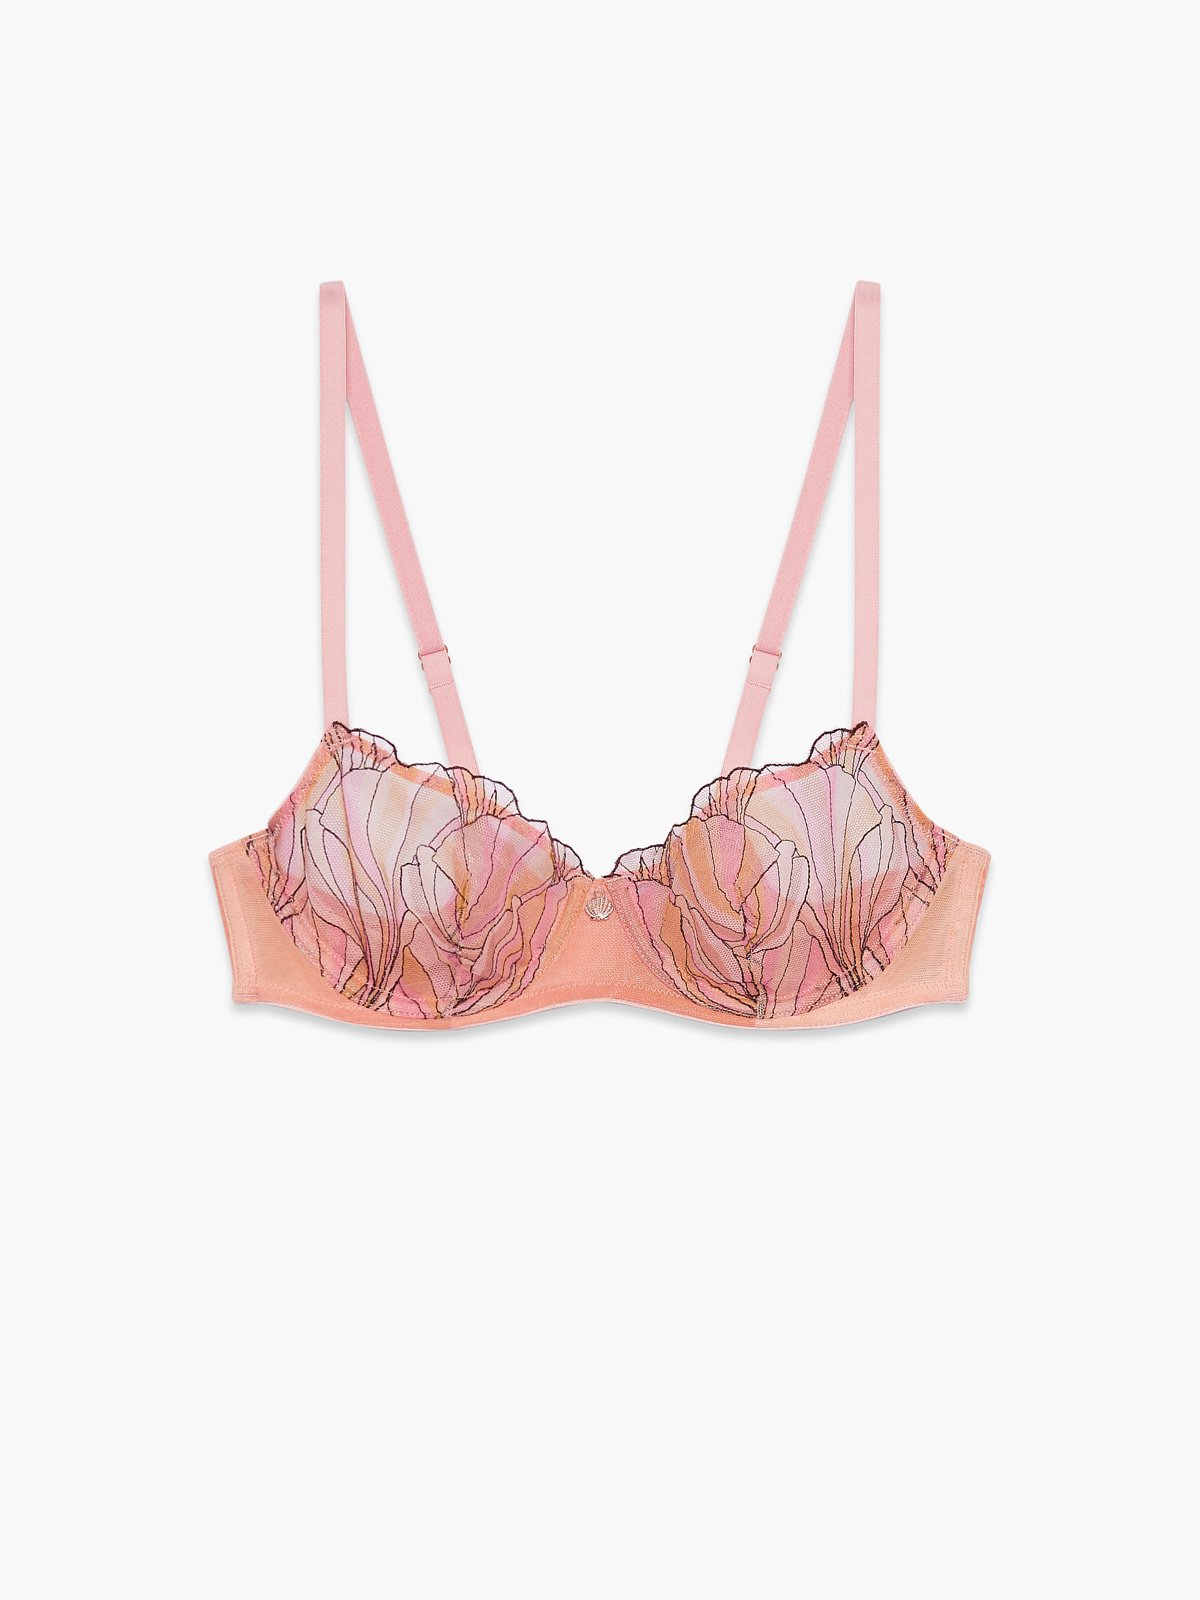 https://cdn.savagex.com/media/images/products/BA2355234-6623/BENEATH-THE-SURFACE-EMBROIDERED-UNLINED-BALCONETTE-BRA-BA2355234-6623-LAYDOWN-1200x1600.jpg